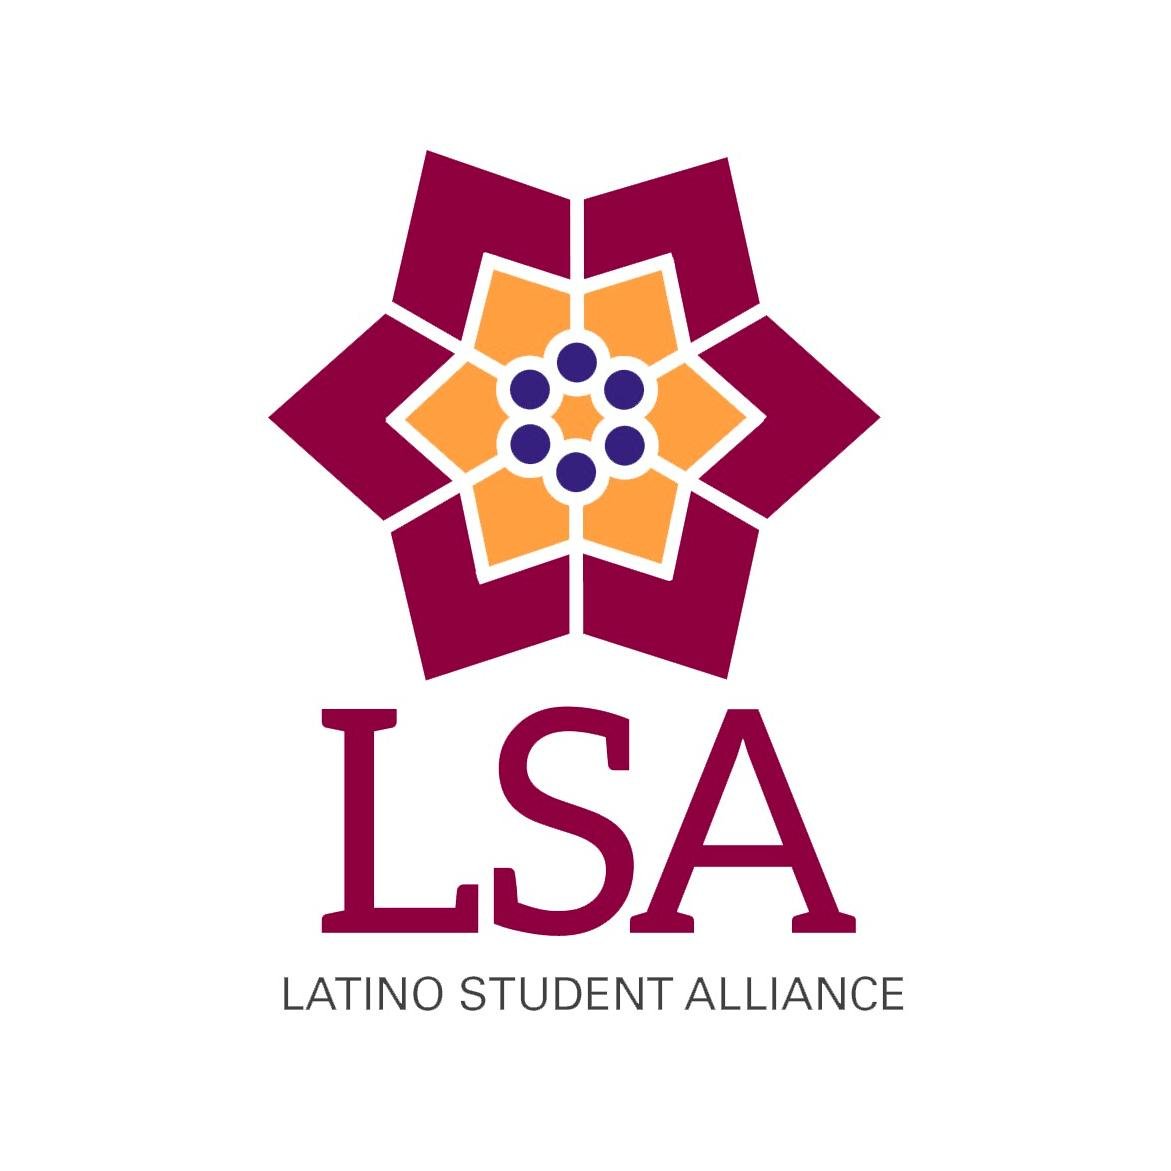 To build, serve, and promote ND's Latino community.